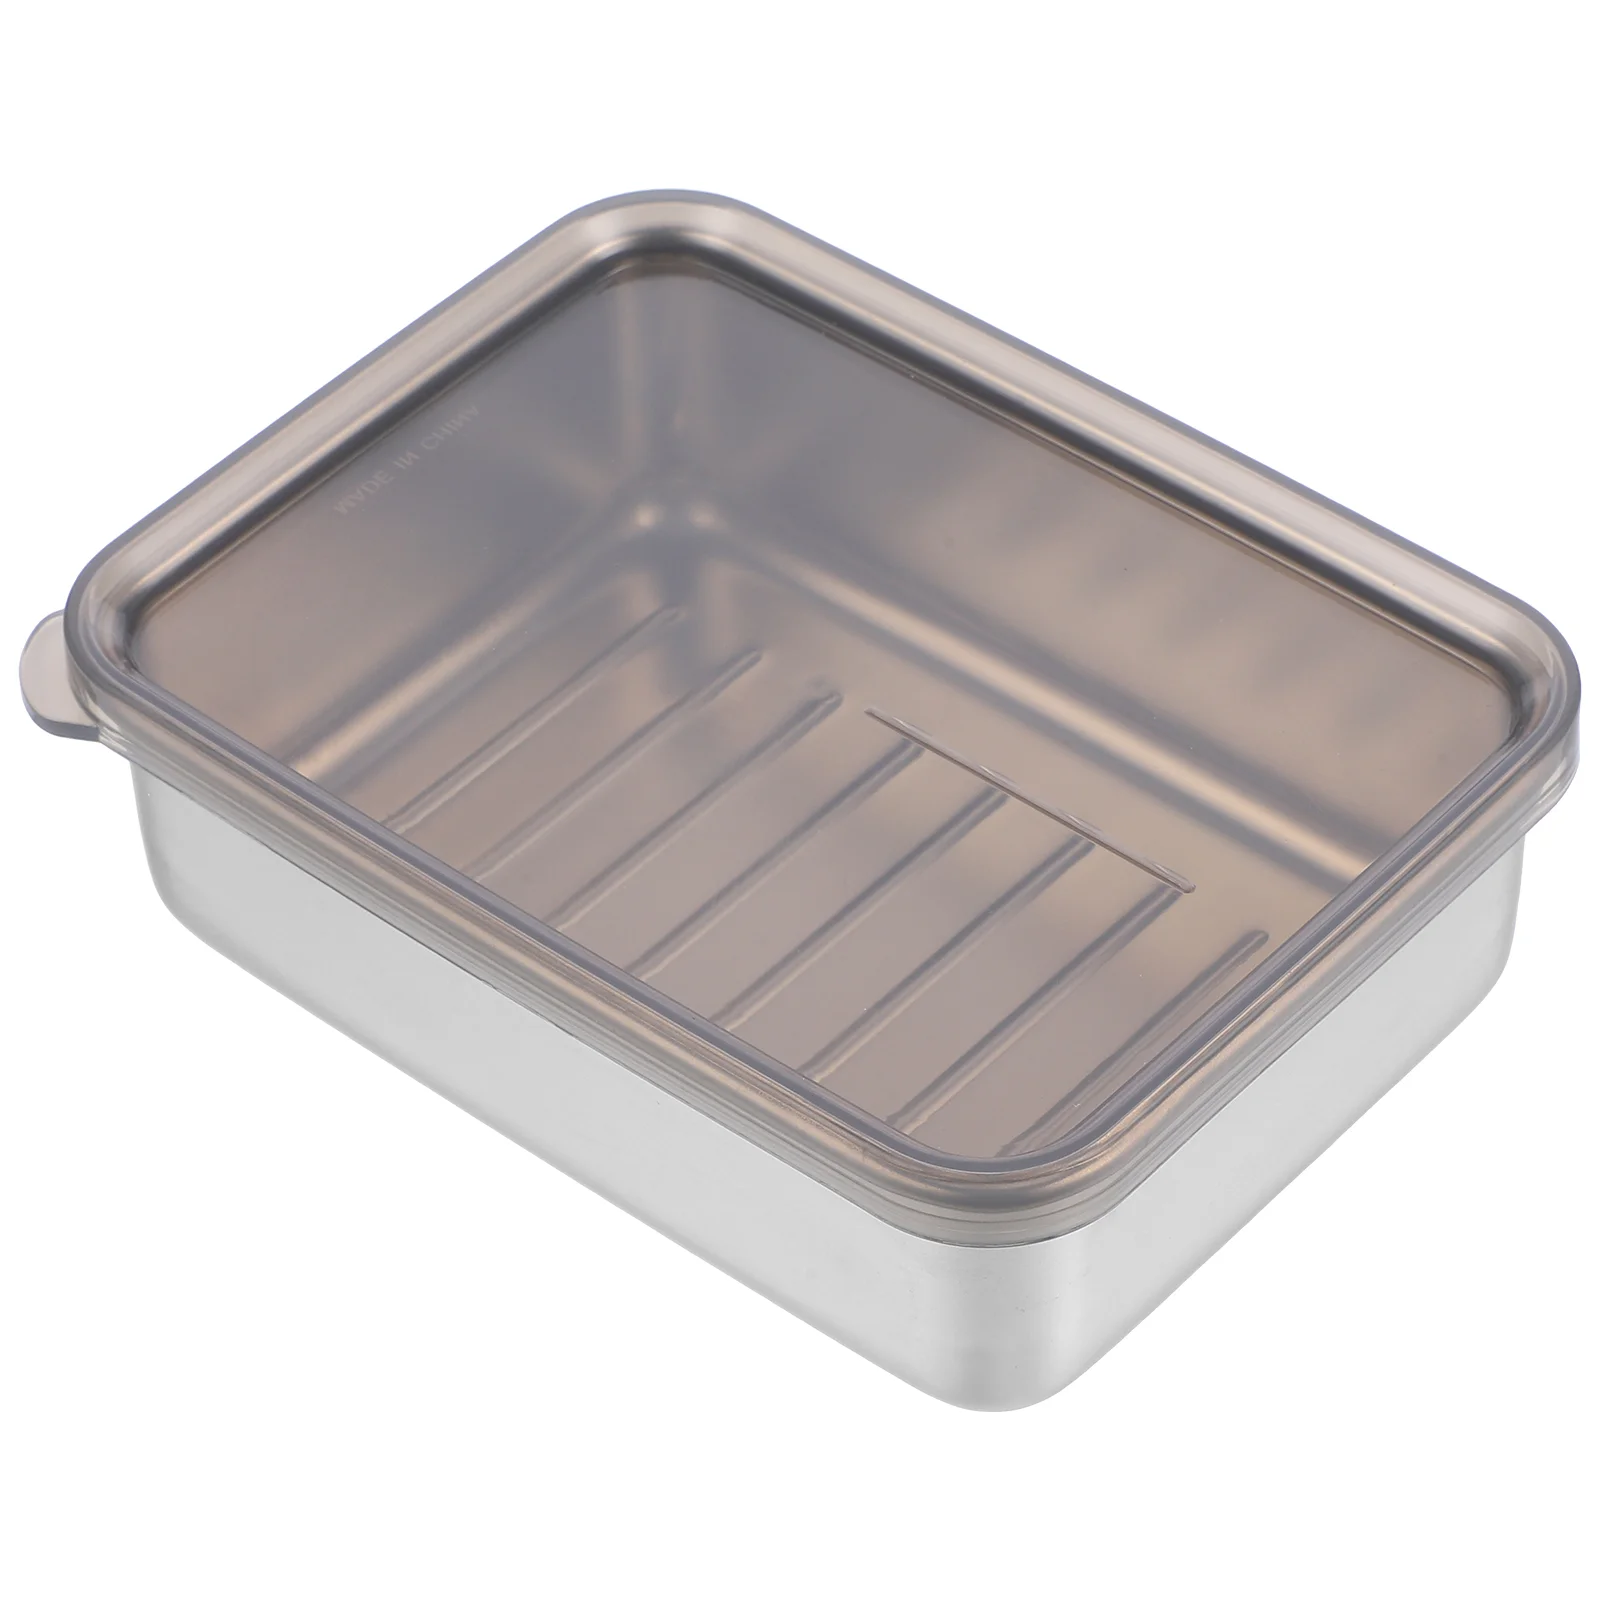 

Food Containers Stainless Steel Crisper For Fridge Storage Box Cheese Keeper Portable Butter Cases Slice Refrigerator